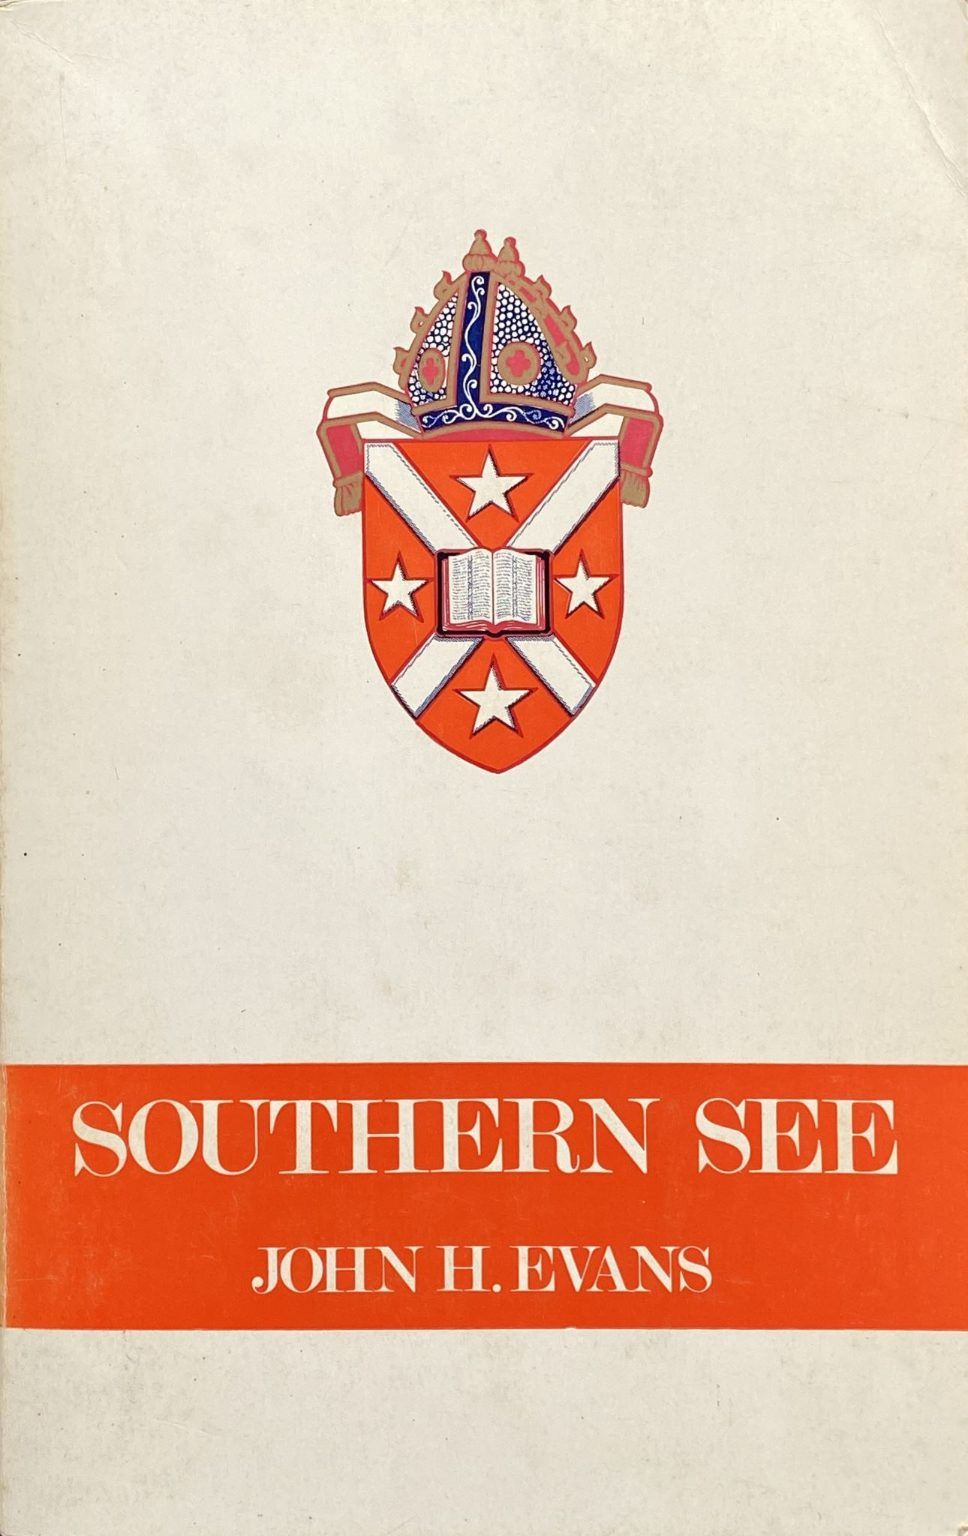 SOUTHERN SEE: The Anglican Diocese of Dunedin